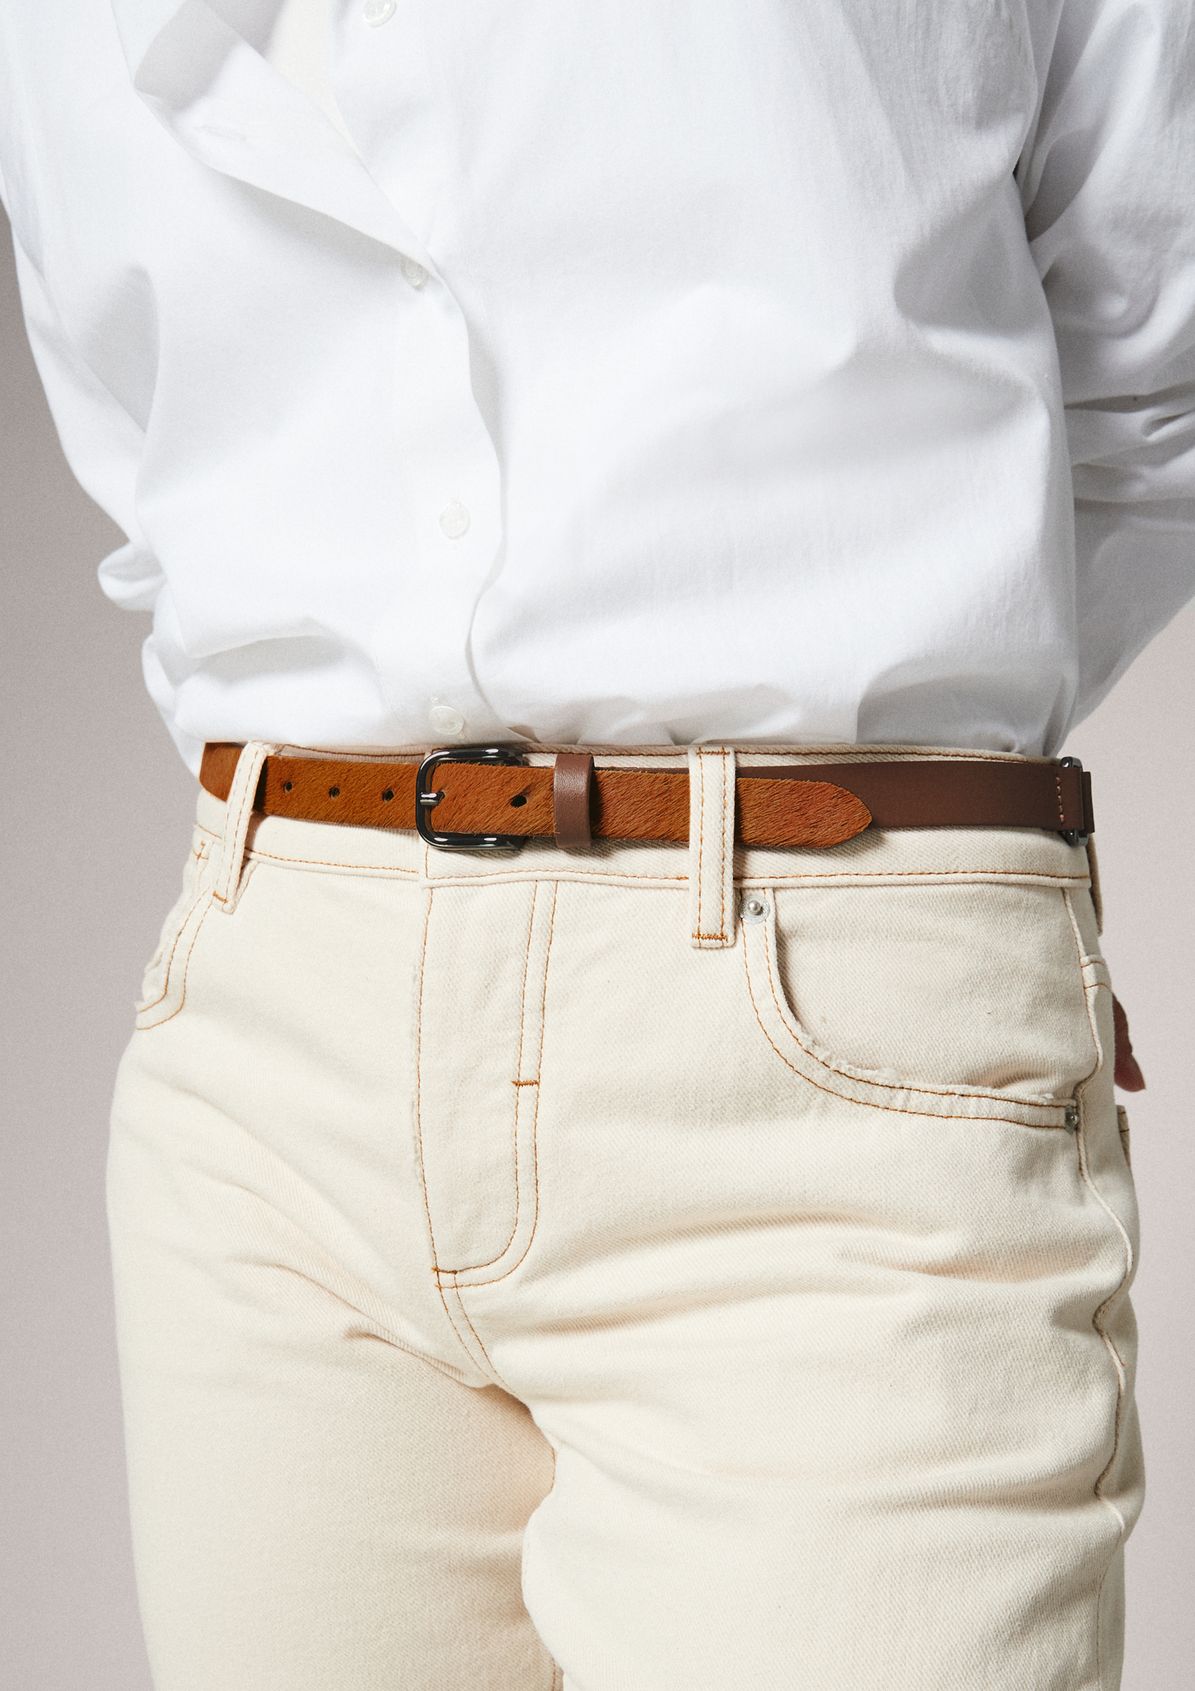 Two-tone leather belt from comma